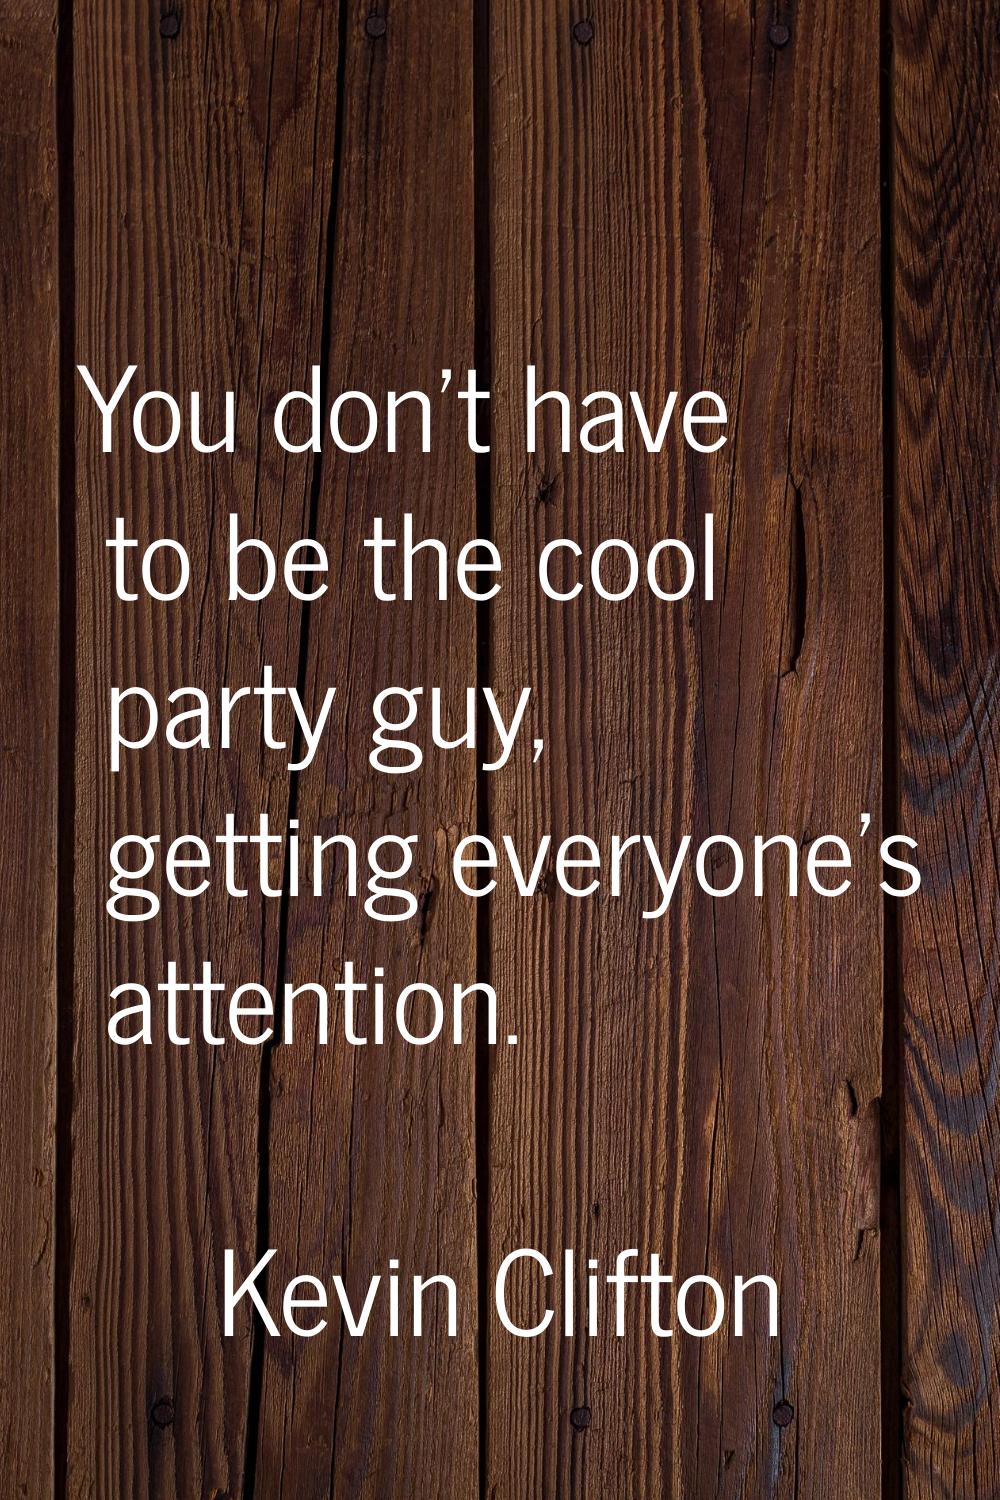 You don’t have to be the cool party guy, getting everyone’s attention.